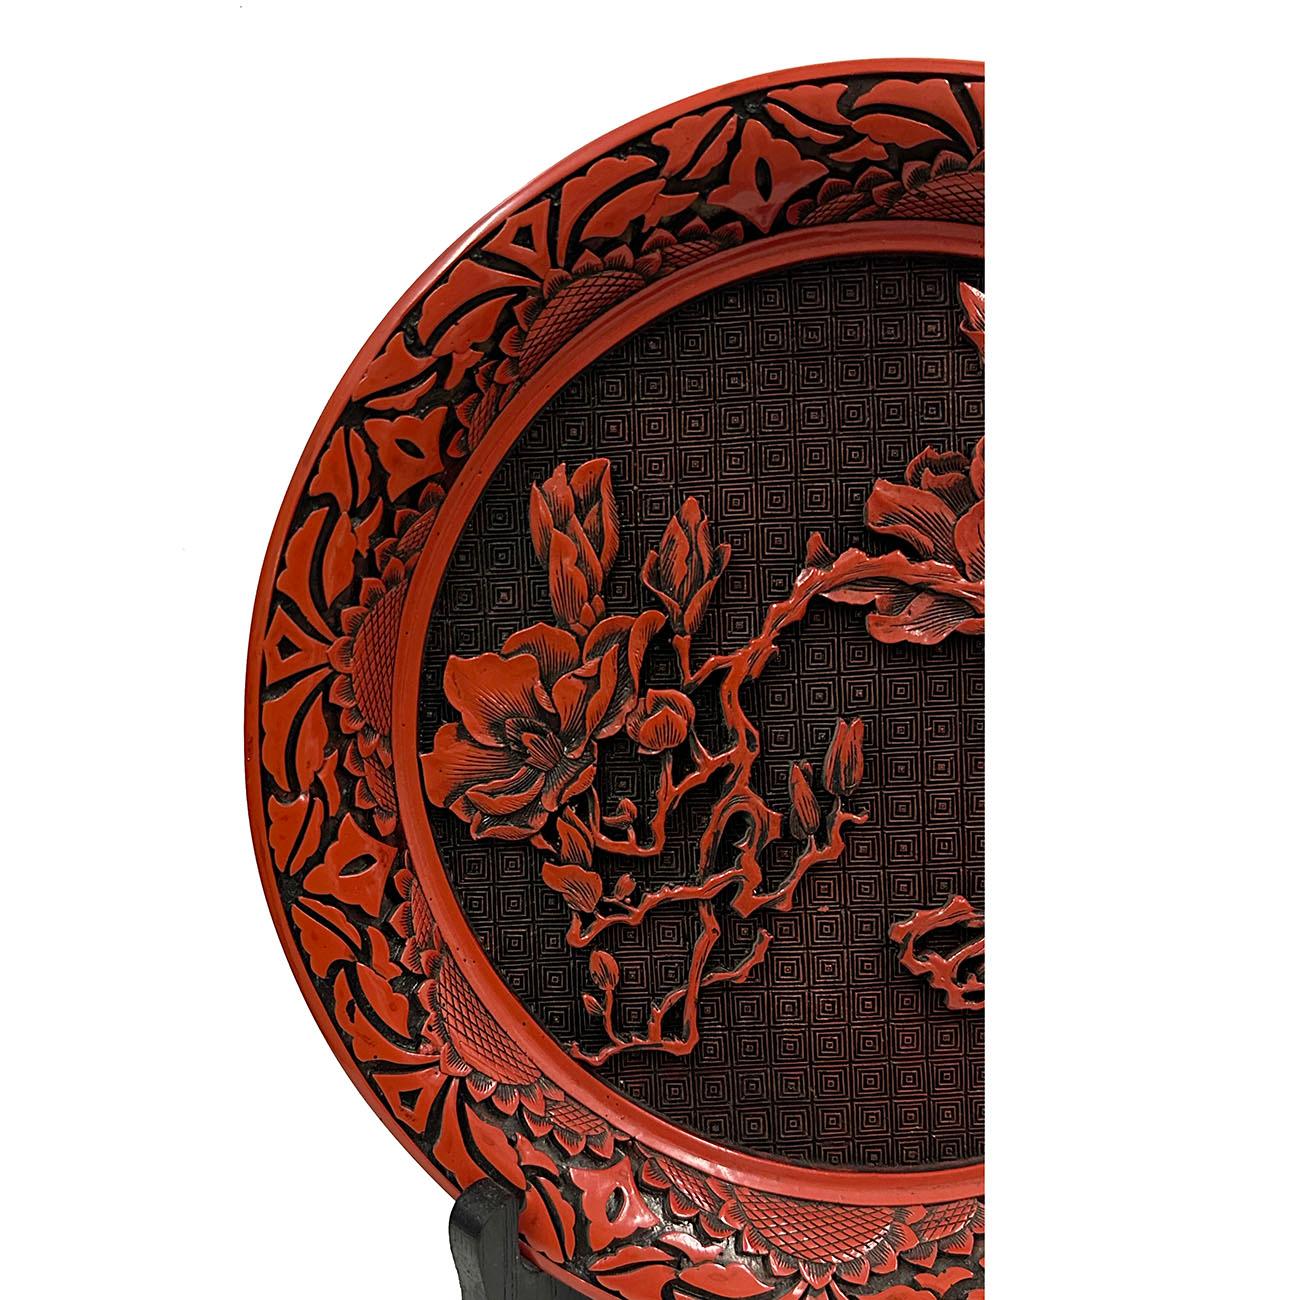 This stunning Chinese hand carved cinnabar lacquered plate has Intricate lacquer carving arts of Chinese traditional Floral scene design, an original works of art in the tradition of Chinese folks. It shows Intricate lacquer carving arts of a